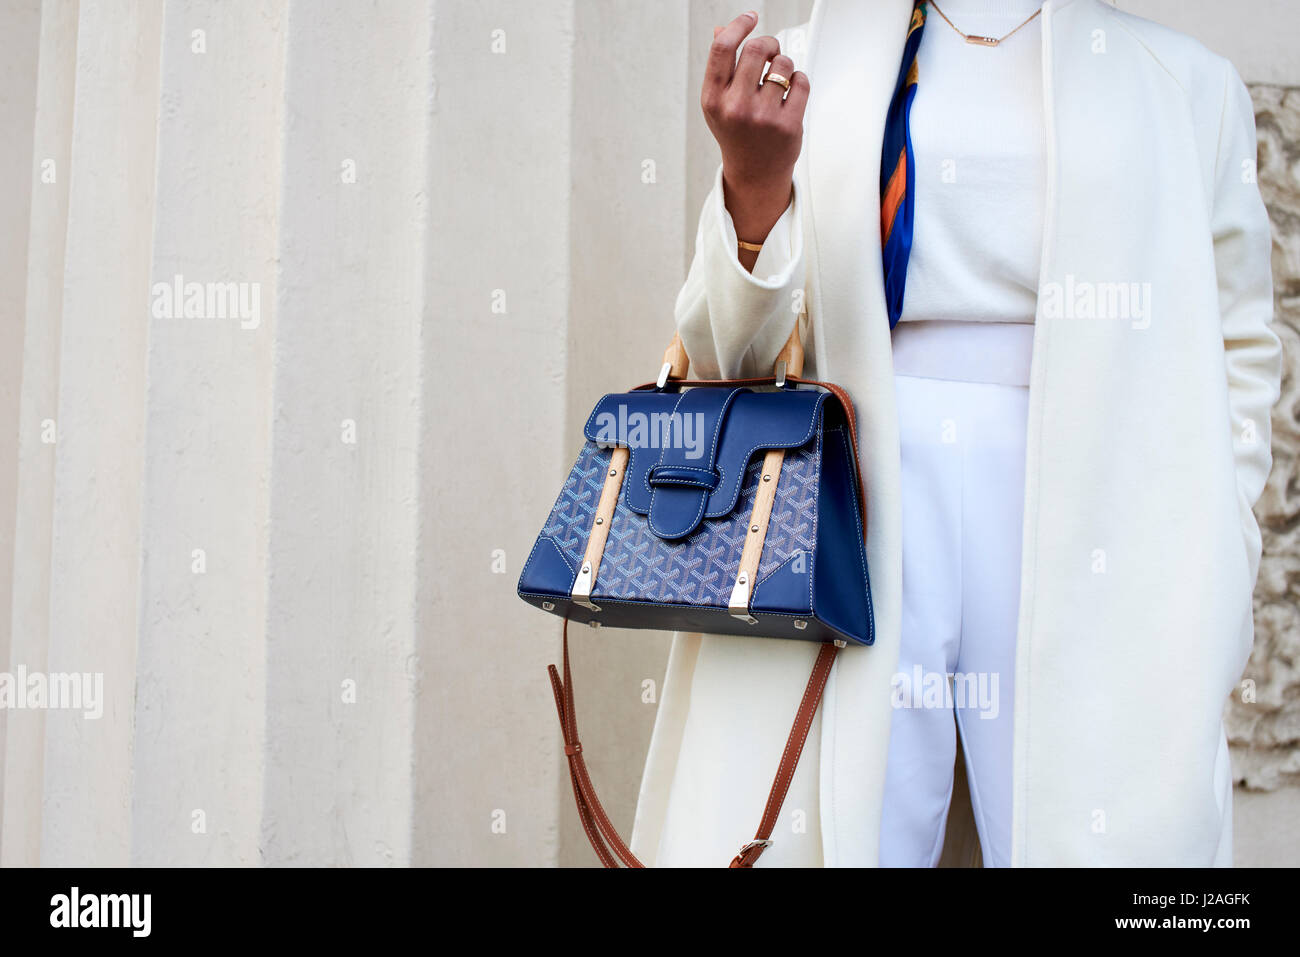 LONDON - FEBRUARY, 2017: Mid section of woman wearing white trousers, coat and metal Chopard belt holding a blue handbag in the street against a building during London Fashion Week, horizontal, front view Stock Photo